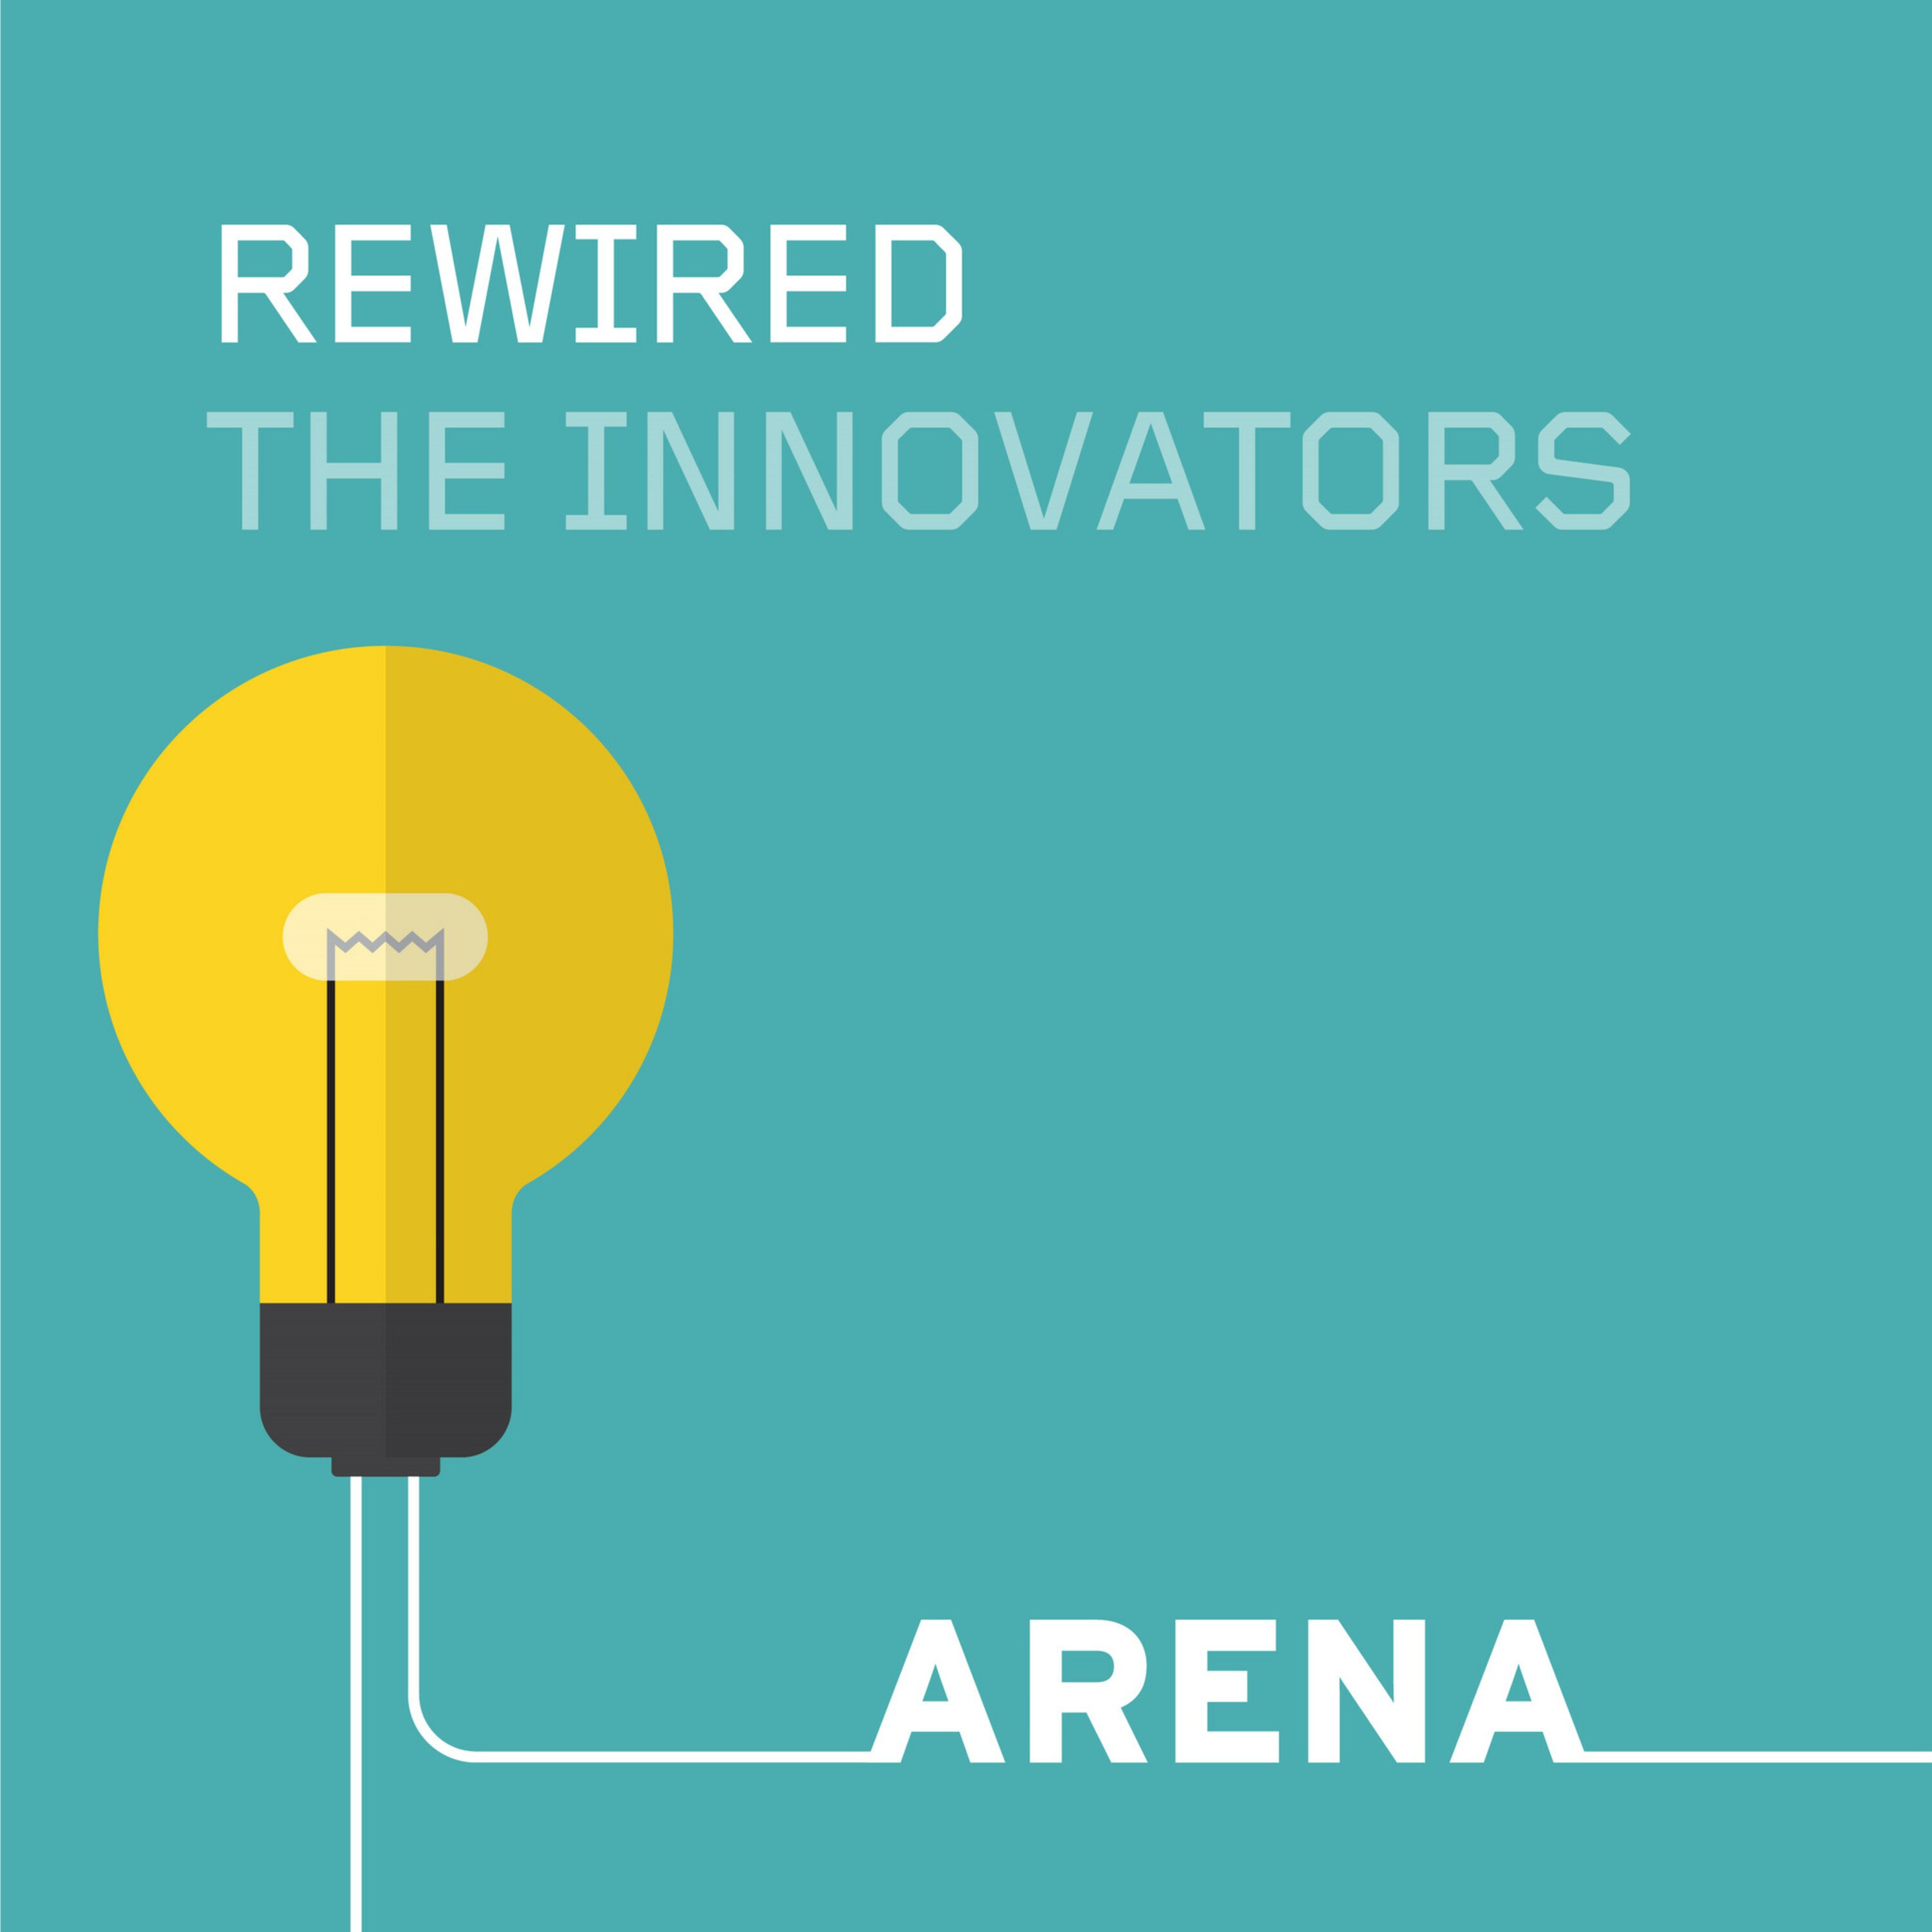 Introducing our new series, The Innovators